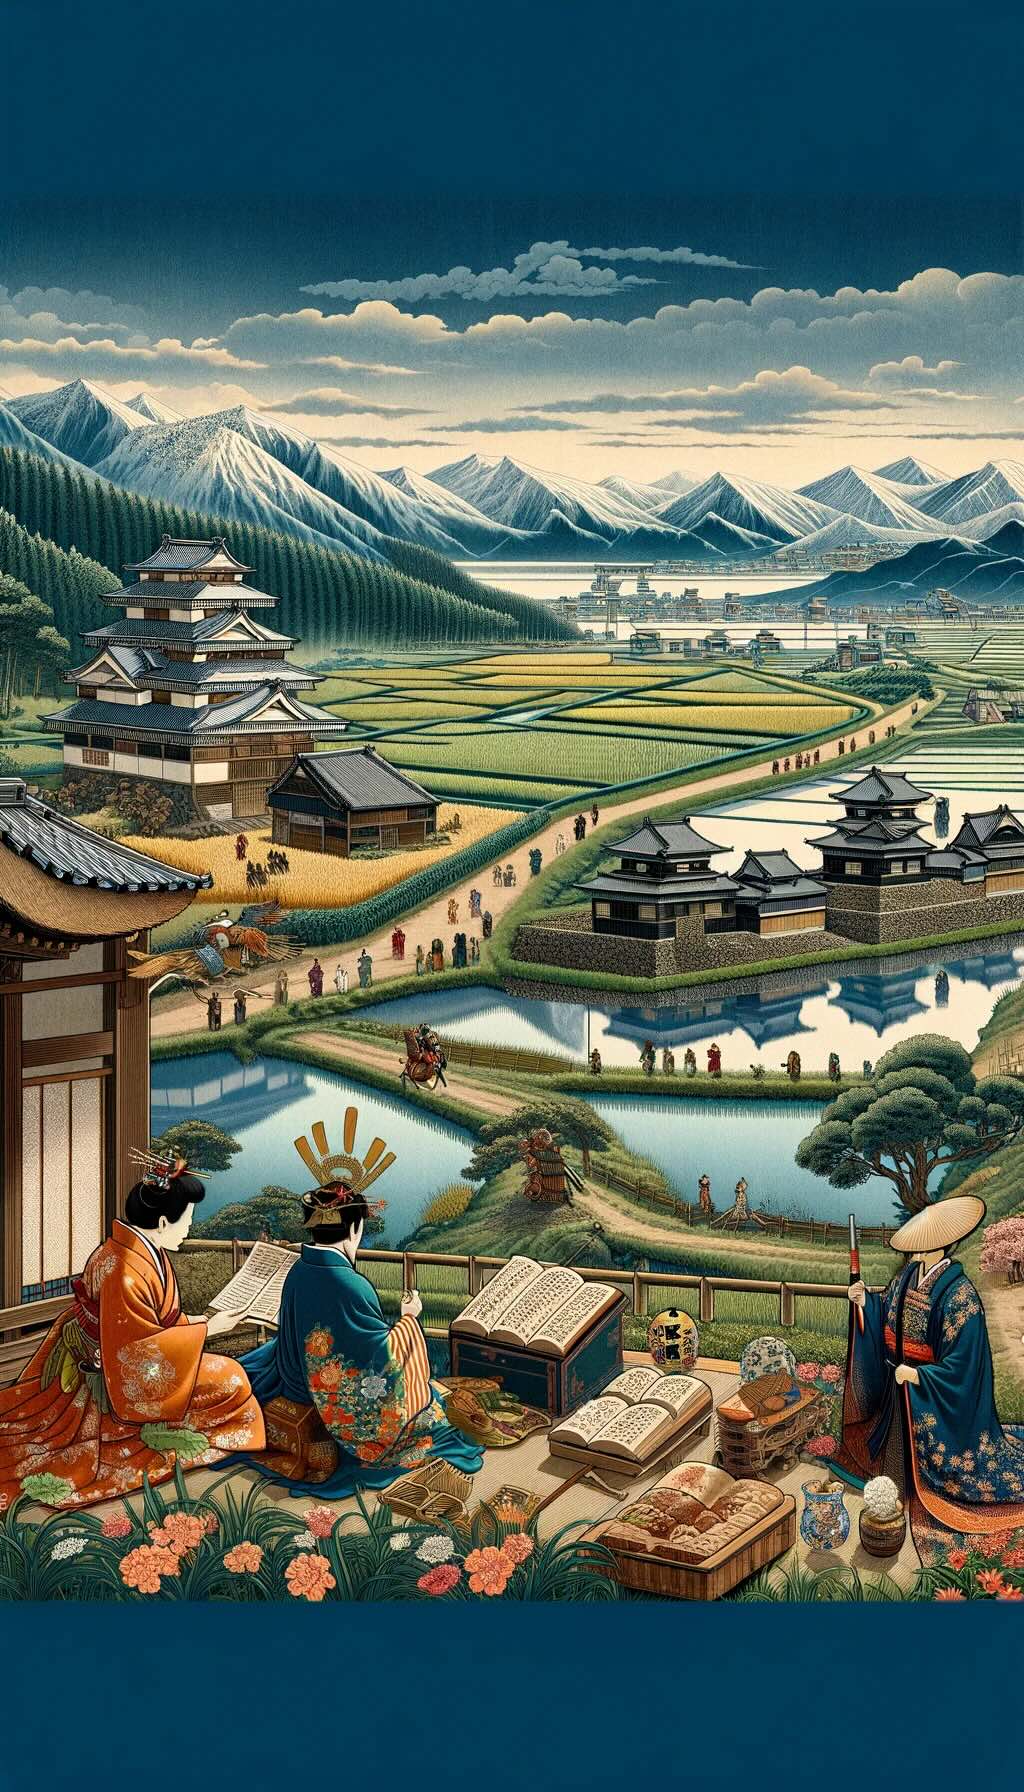 Historical and cultural significance of Japan's countryside depicts a serene and picturesque rural landscape, taking us back through time to explore the depth of Japan's cultural and spiritual ethos